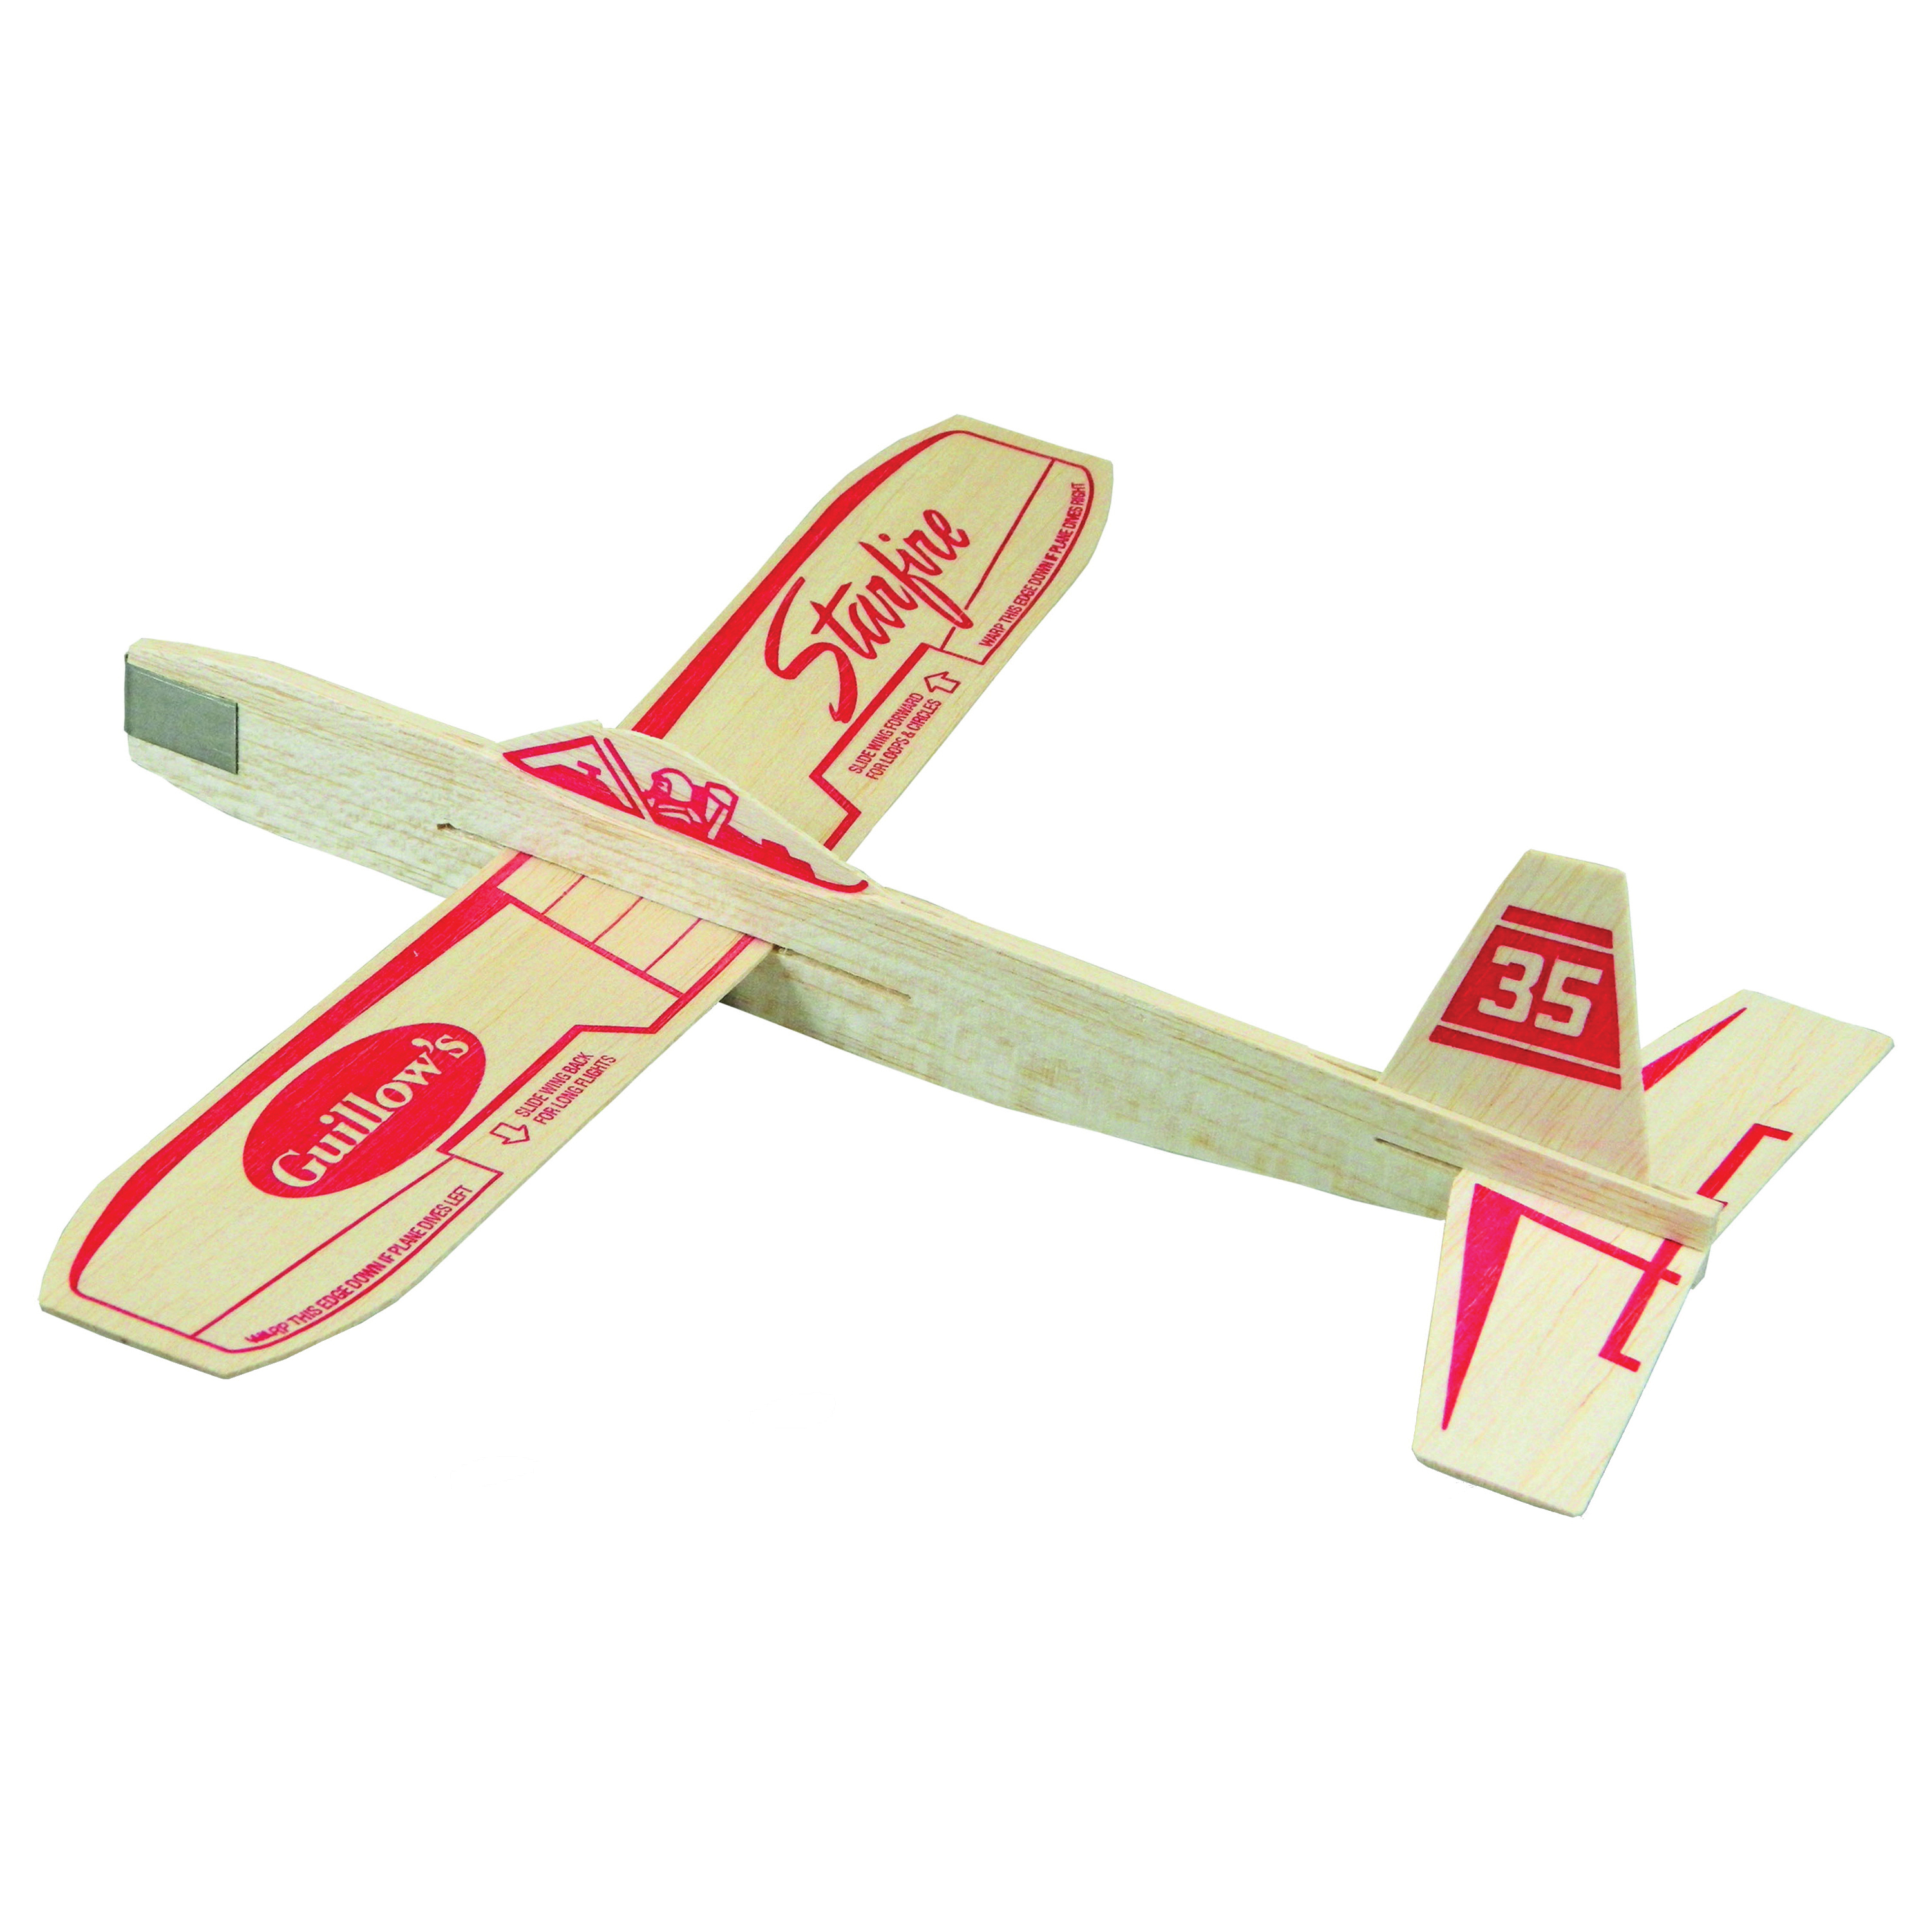 Guillow's Starfire 35 Balsa Glider Plane, 3 years and Up, 12 in, Wood - 1